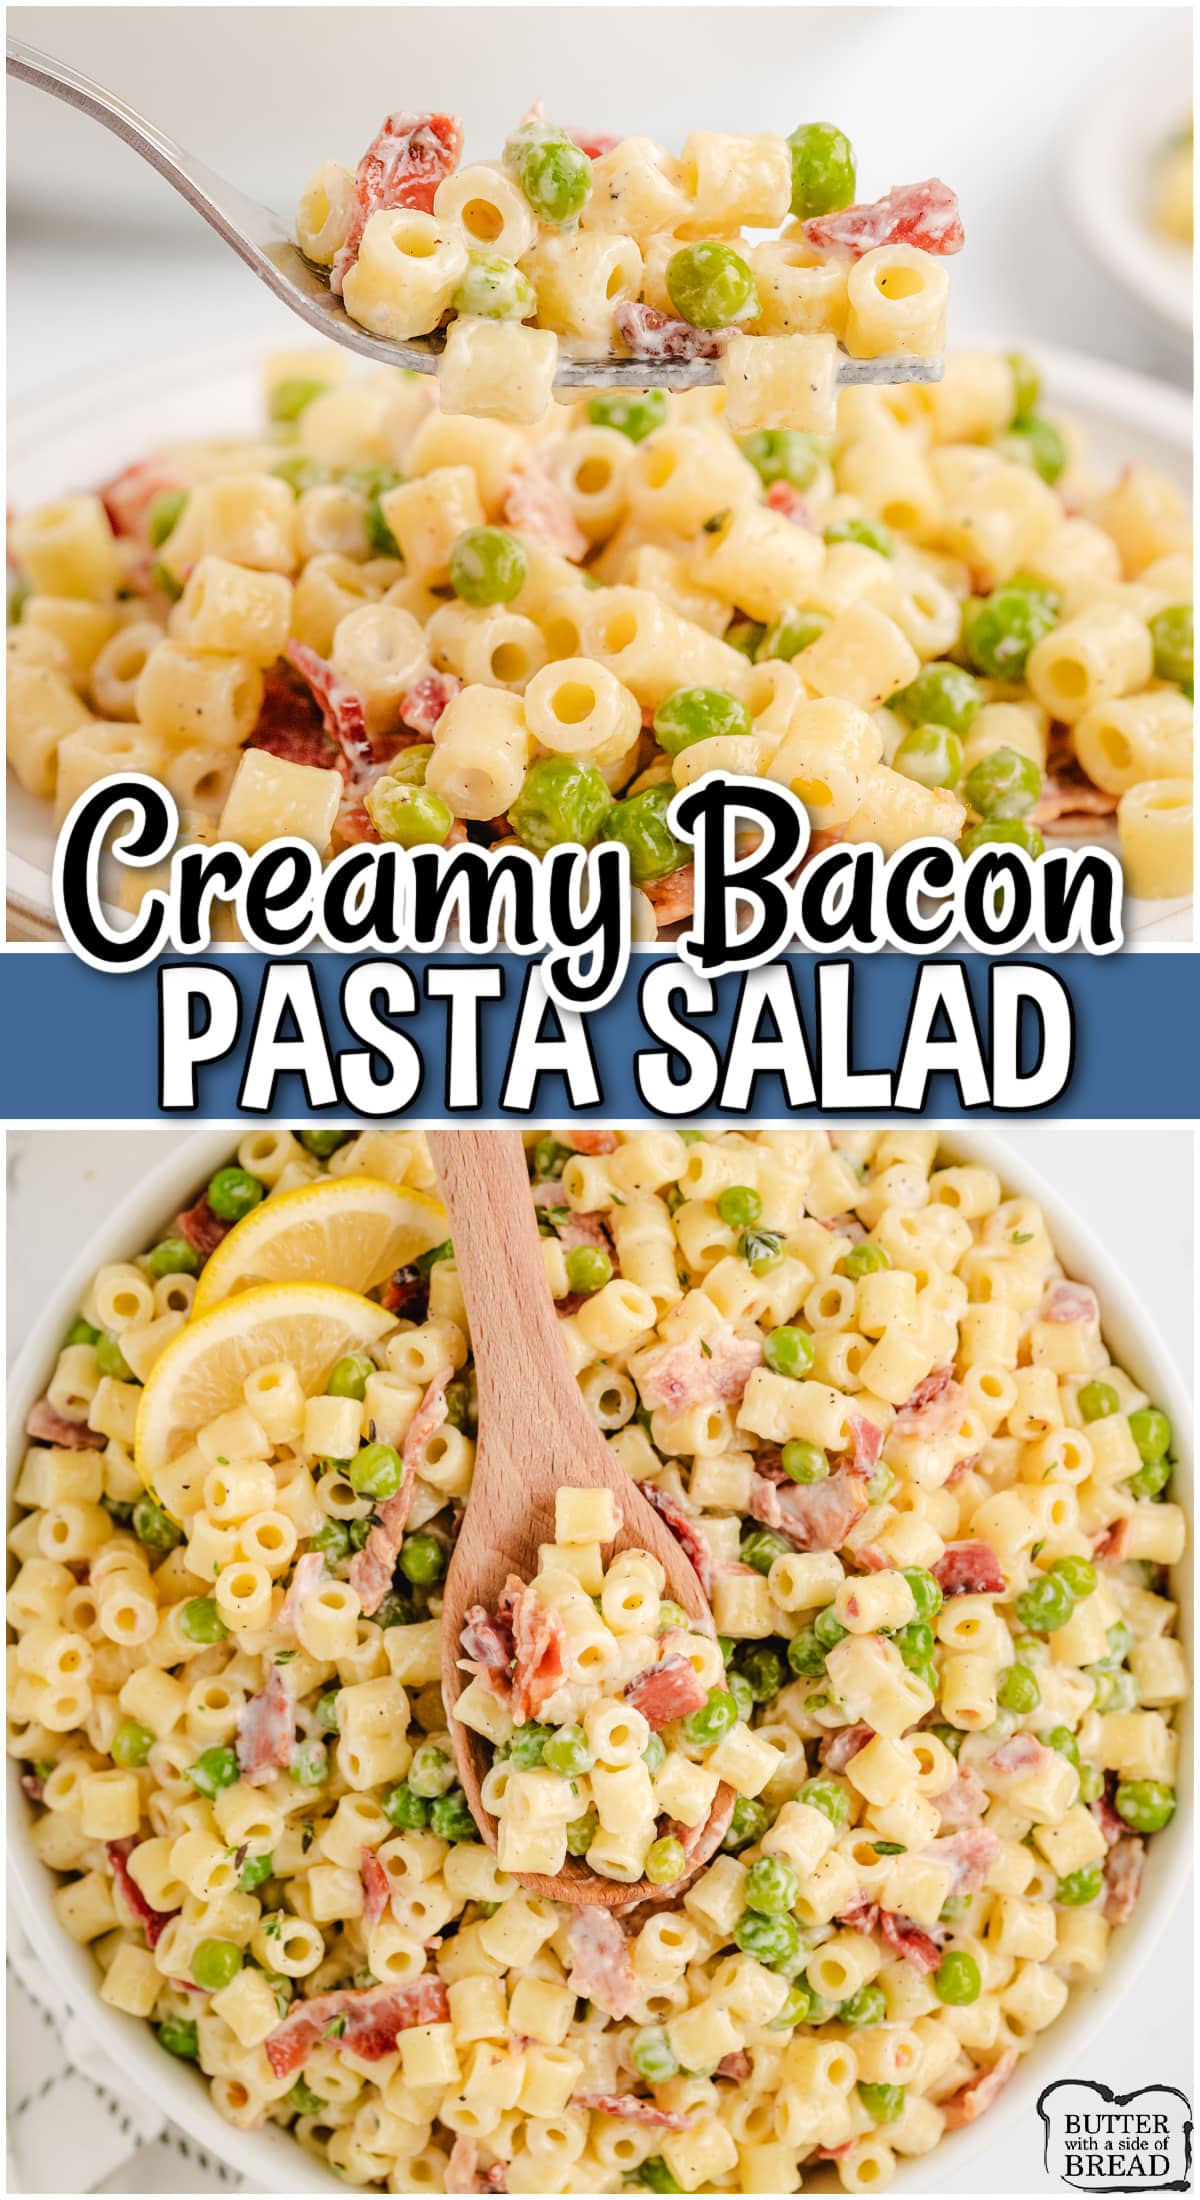 Creamy Bacon Pasta Salad with Lemon Dressing is a light, flavorful salad perfect for a summer cookout! Made easy with bacon, peas, pasta & a refreshing lemon dressing.